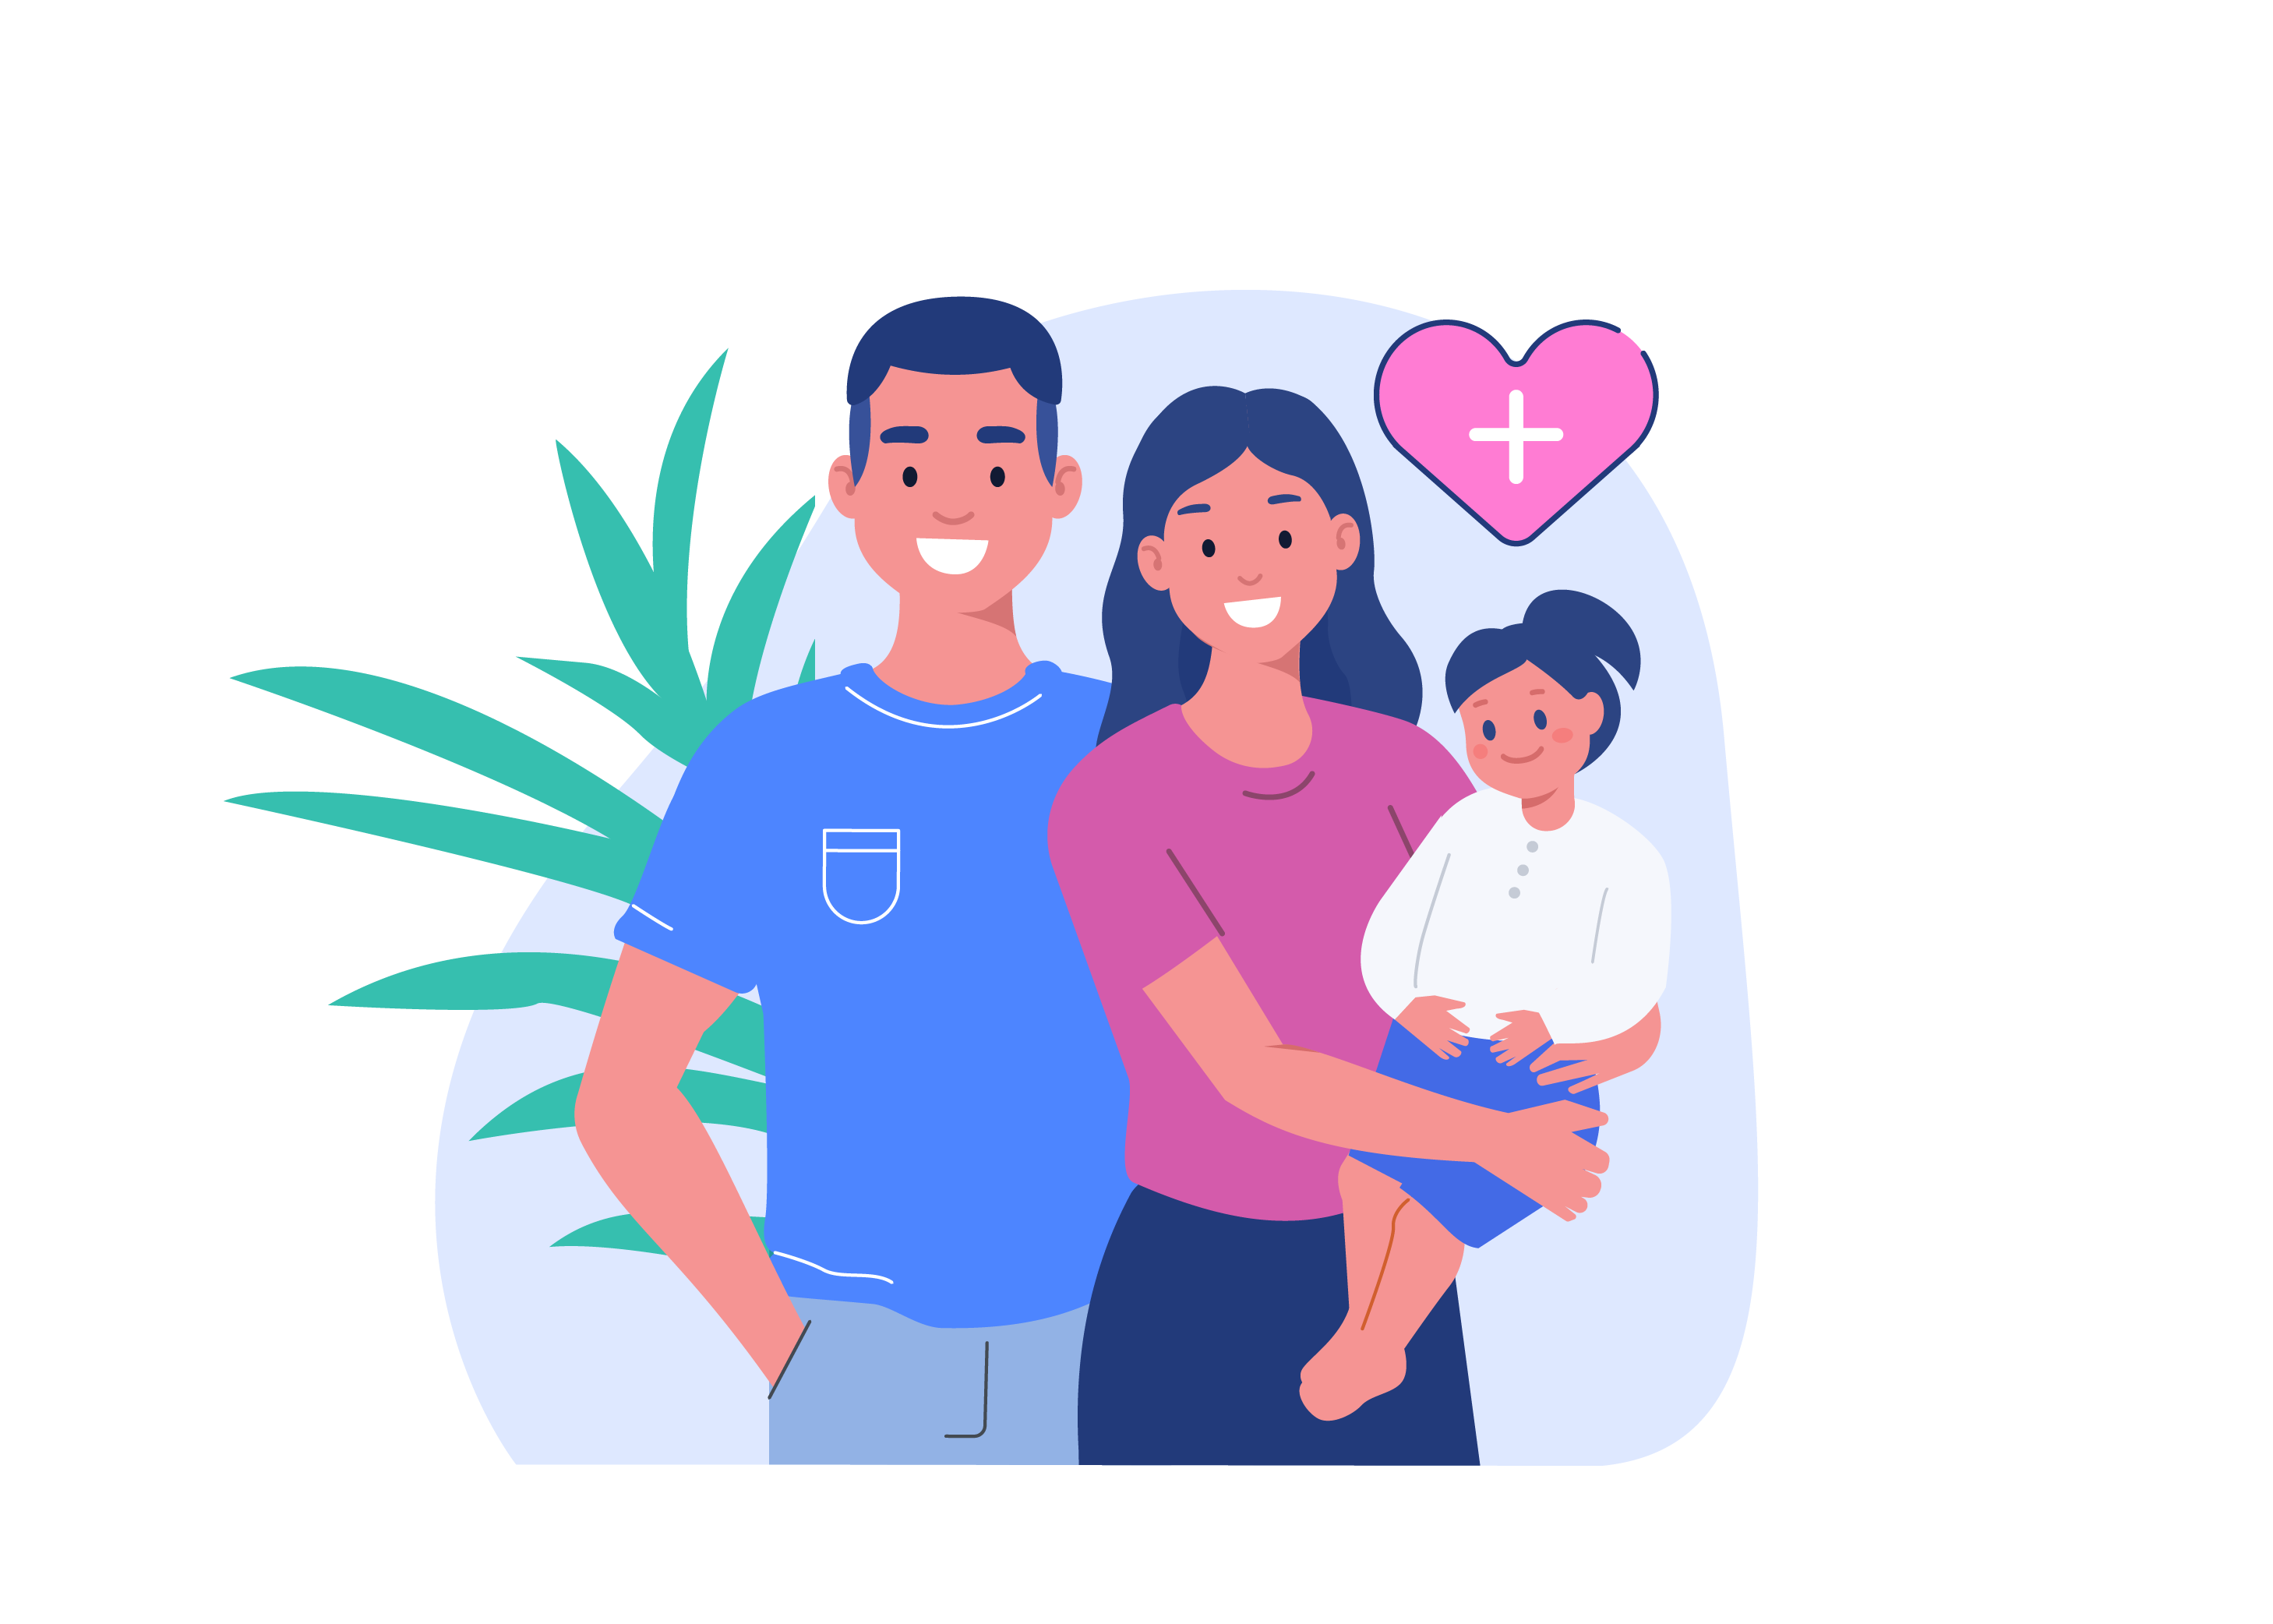 illustrated image of a smiling man, woman, and child